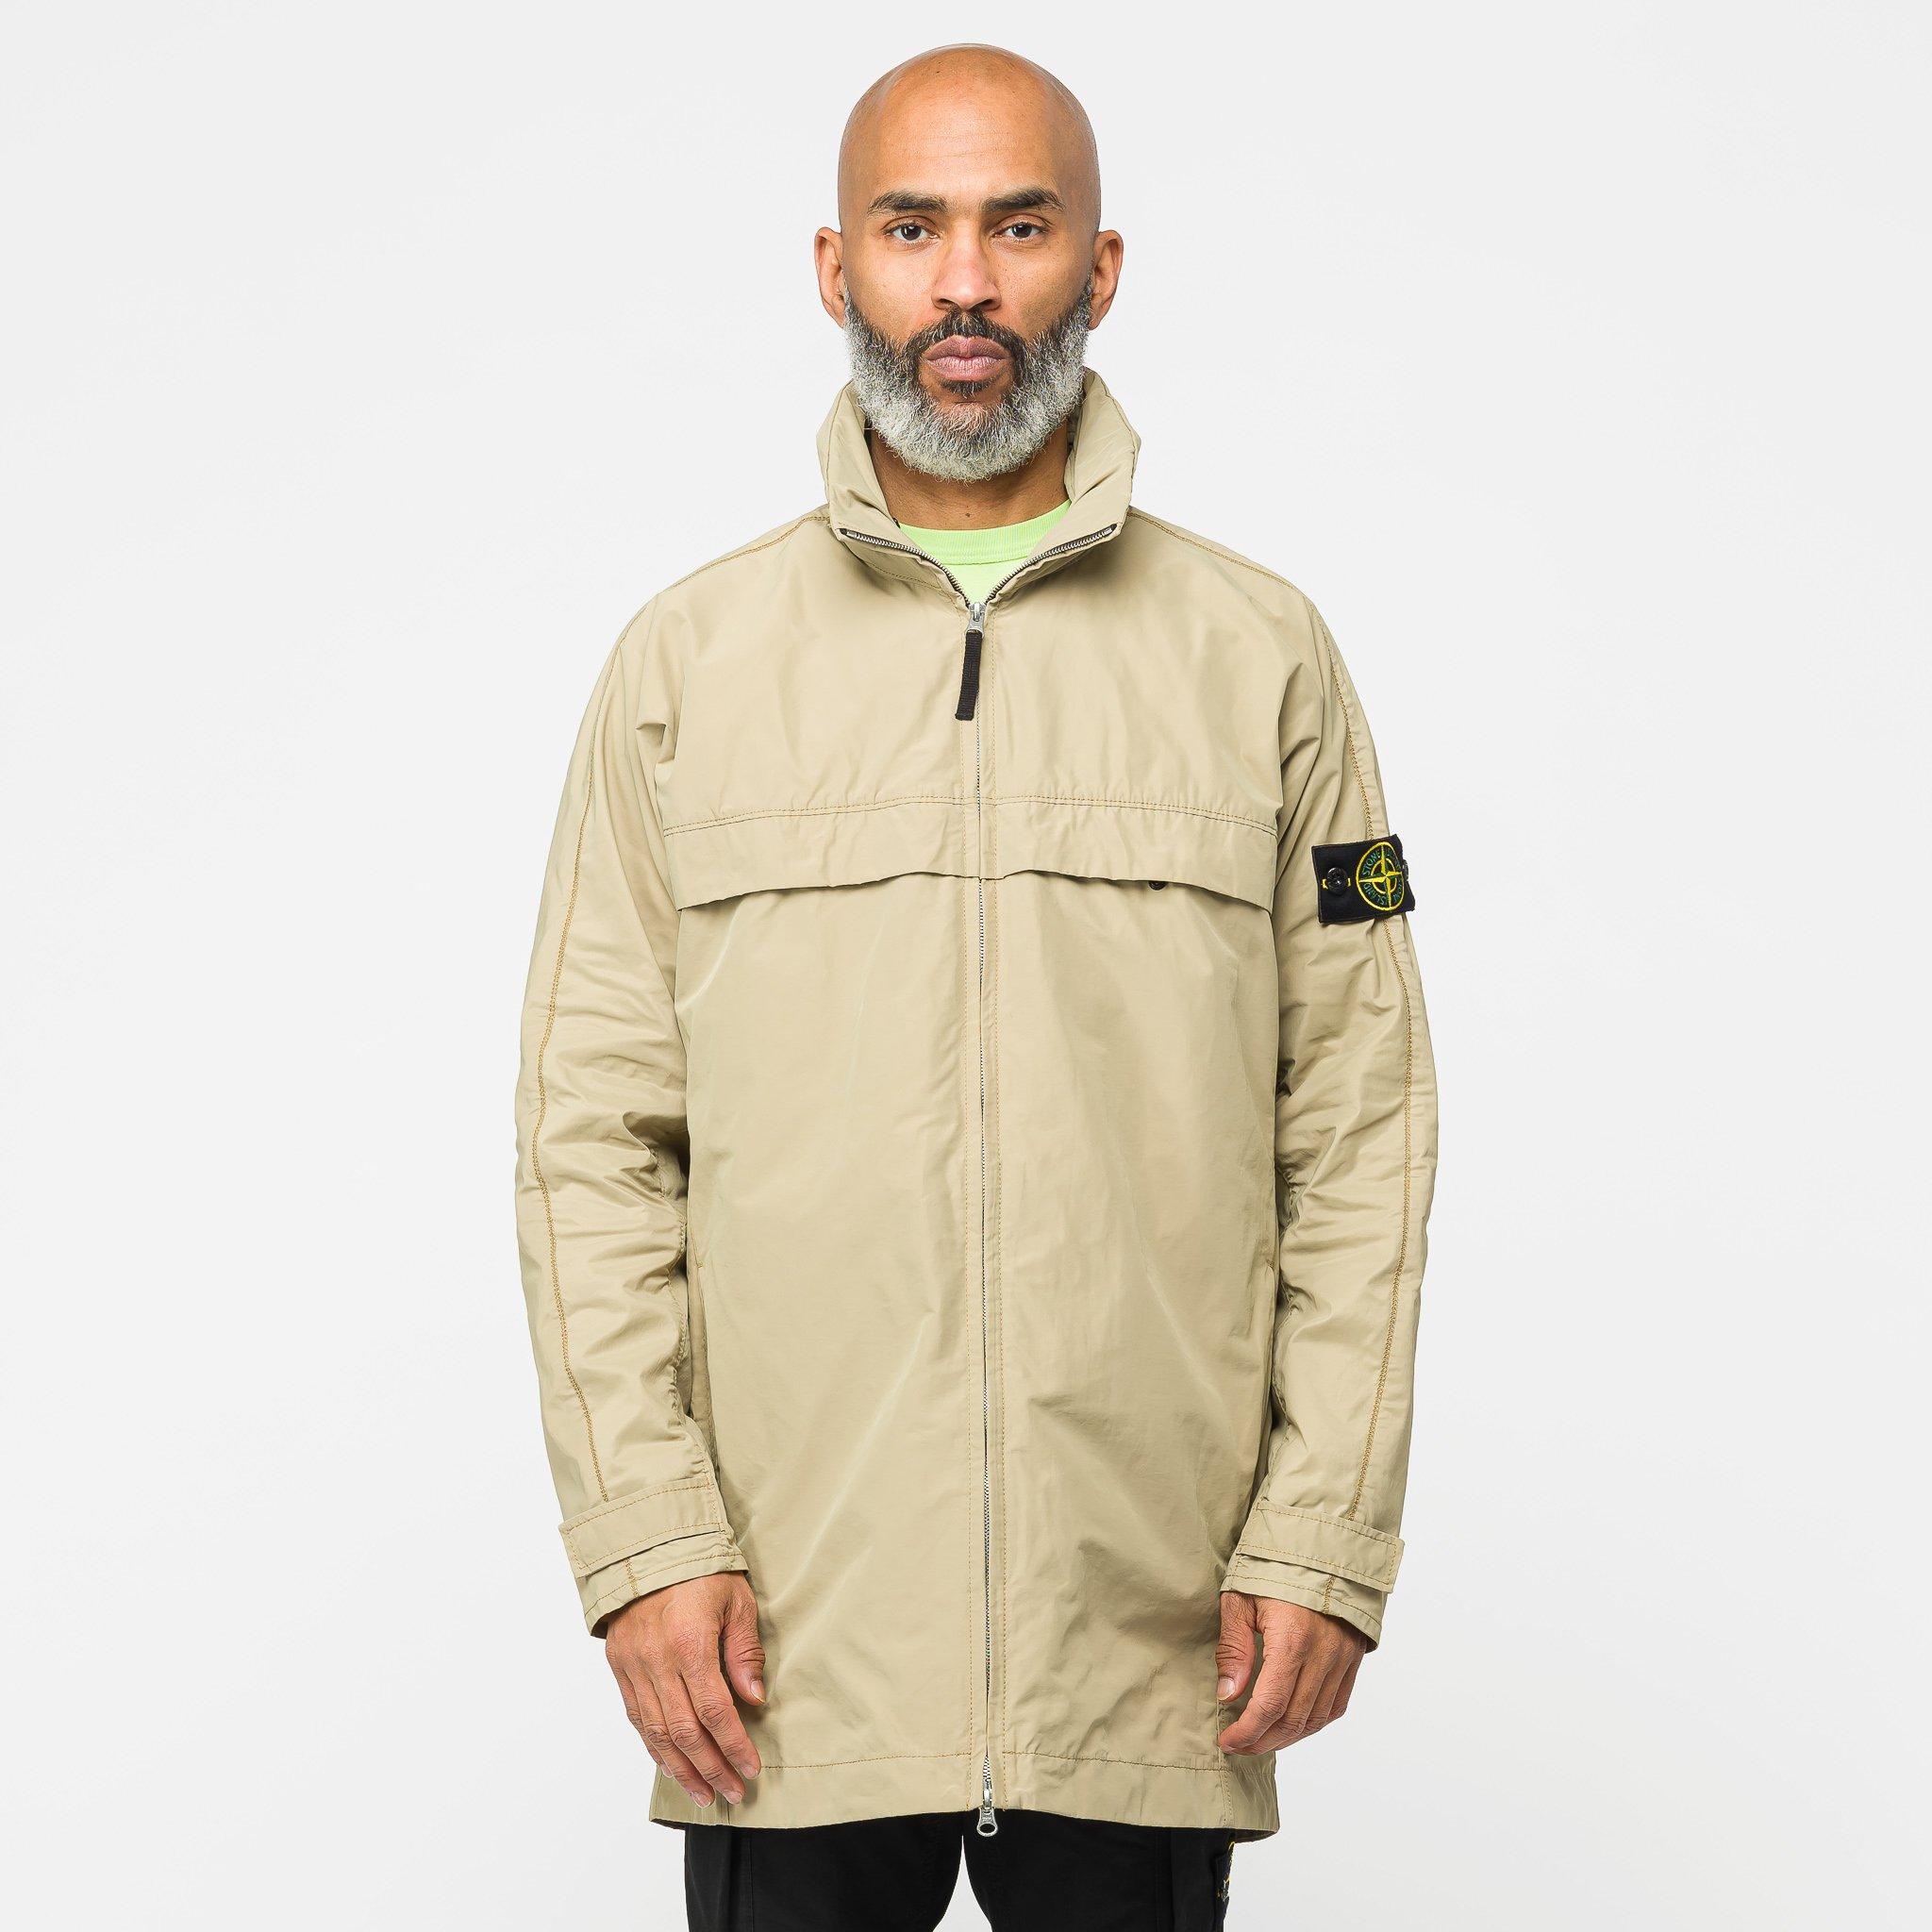 Stone Island Synthetic 40322 Micro Reps Jacket in Dark Beige (Natural) for  Men - Lyst